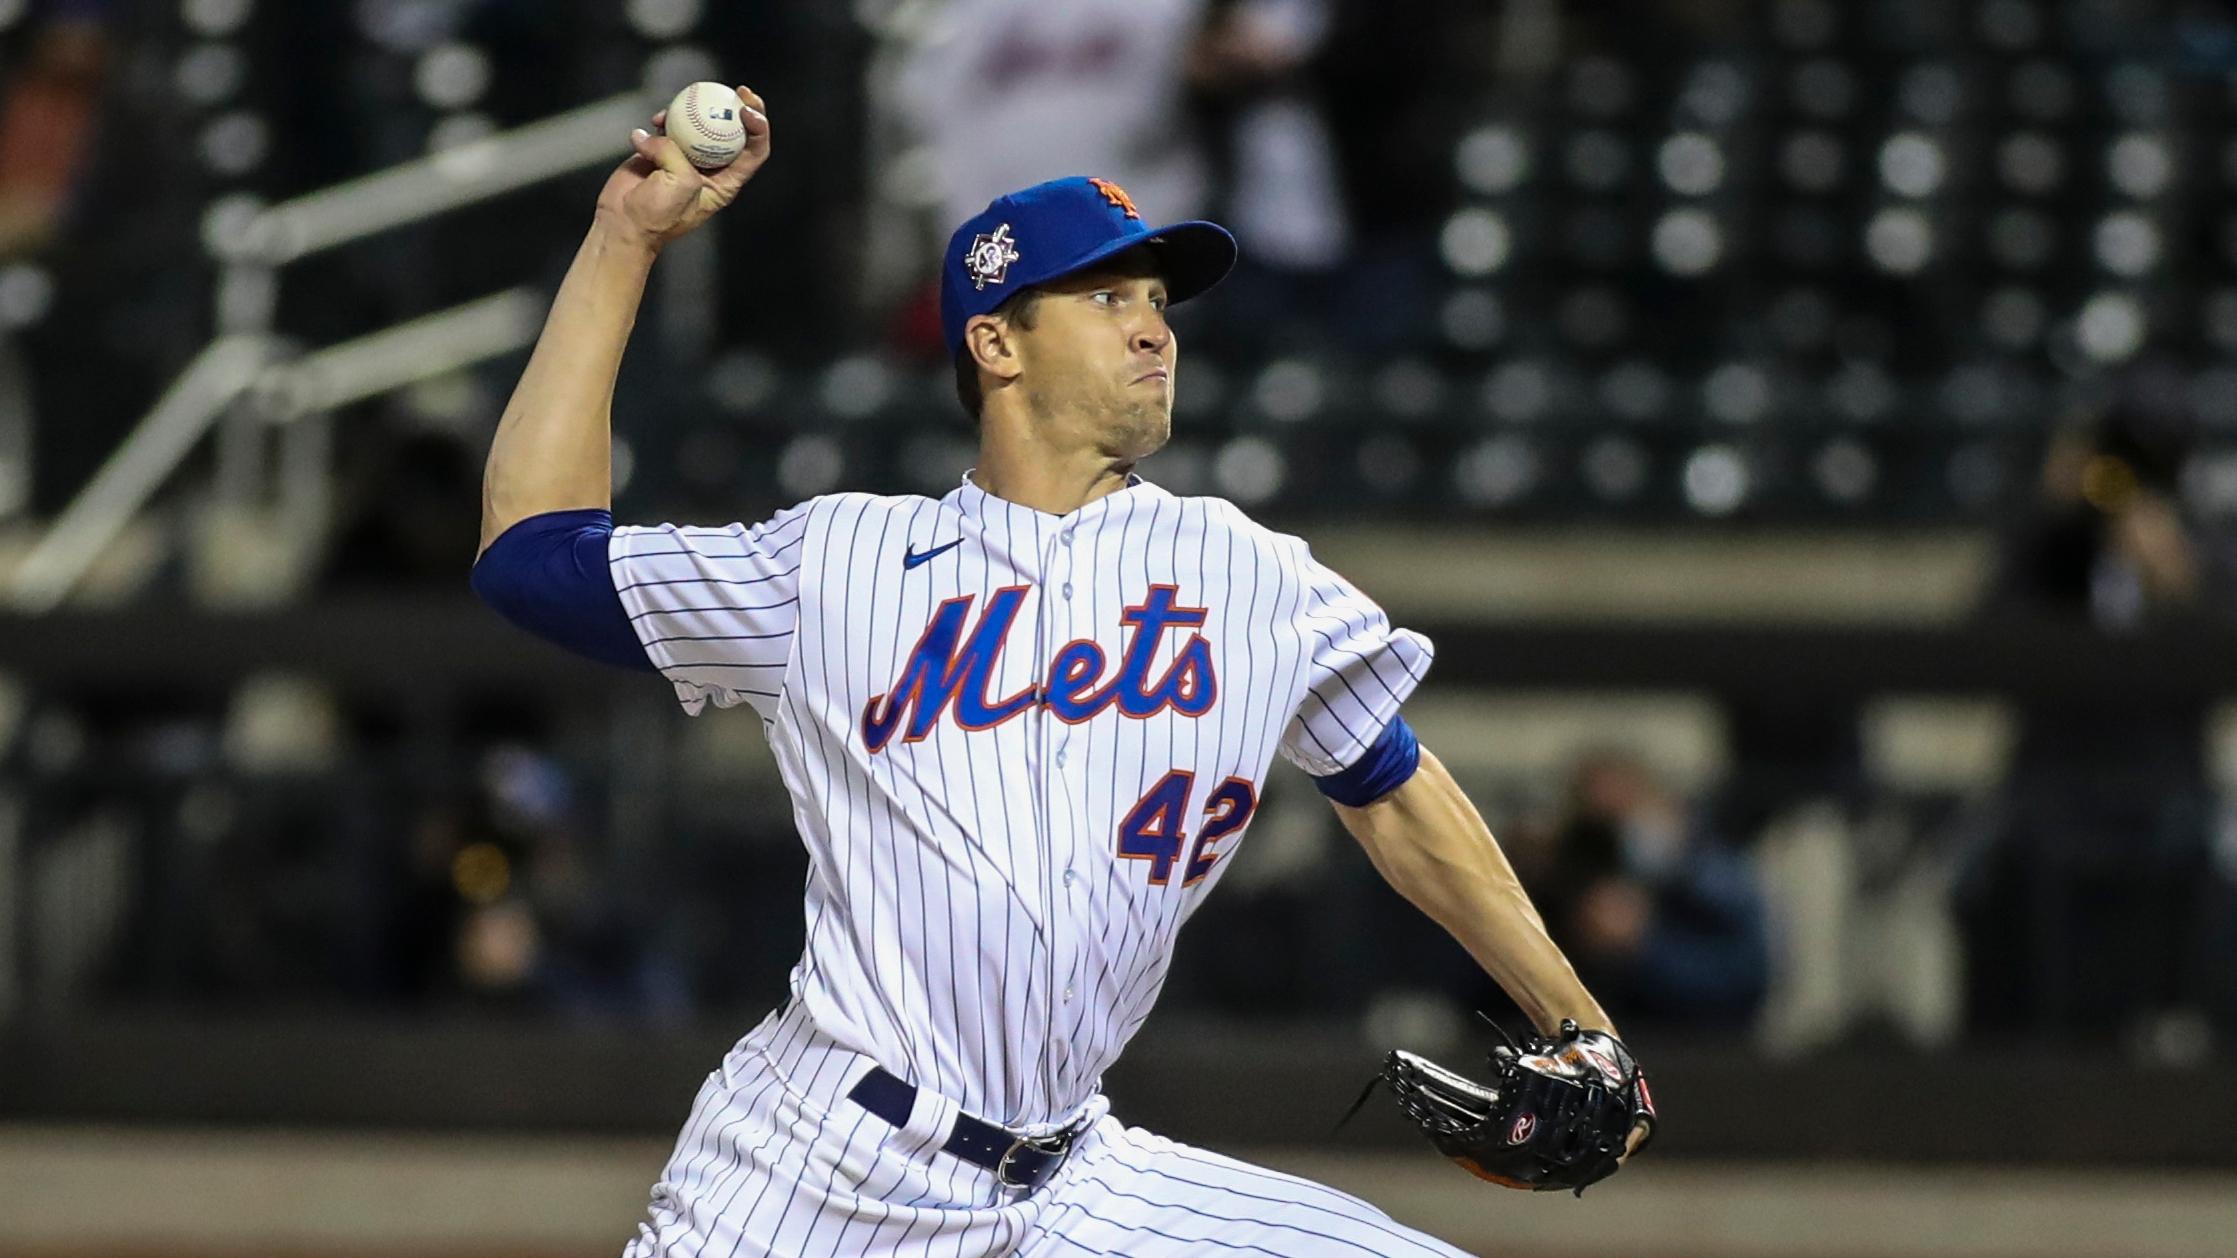 Apr 23, 2021; New York City, New York, USA; New York Mets pitcher Jacob deGrom pitches in the seventh inning against the Washington Nationals at Citi Field. / Wendell Cruz-USA TODAY Sports